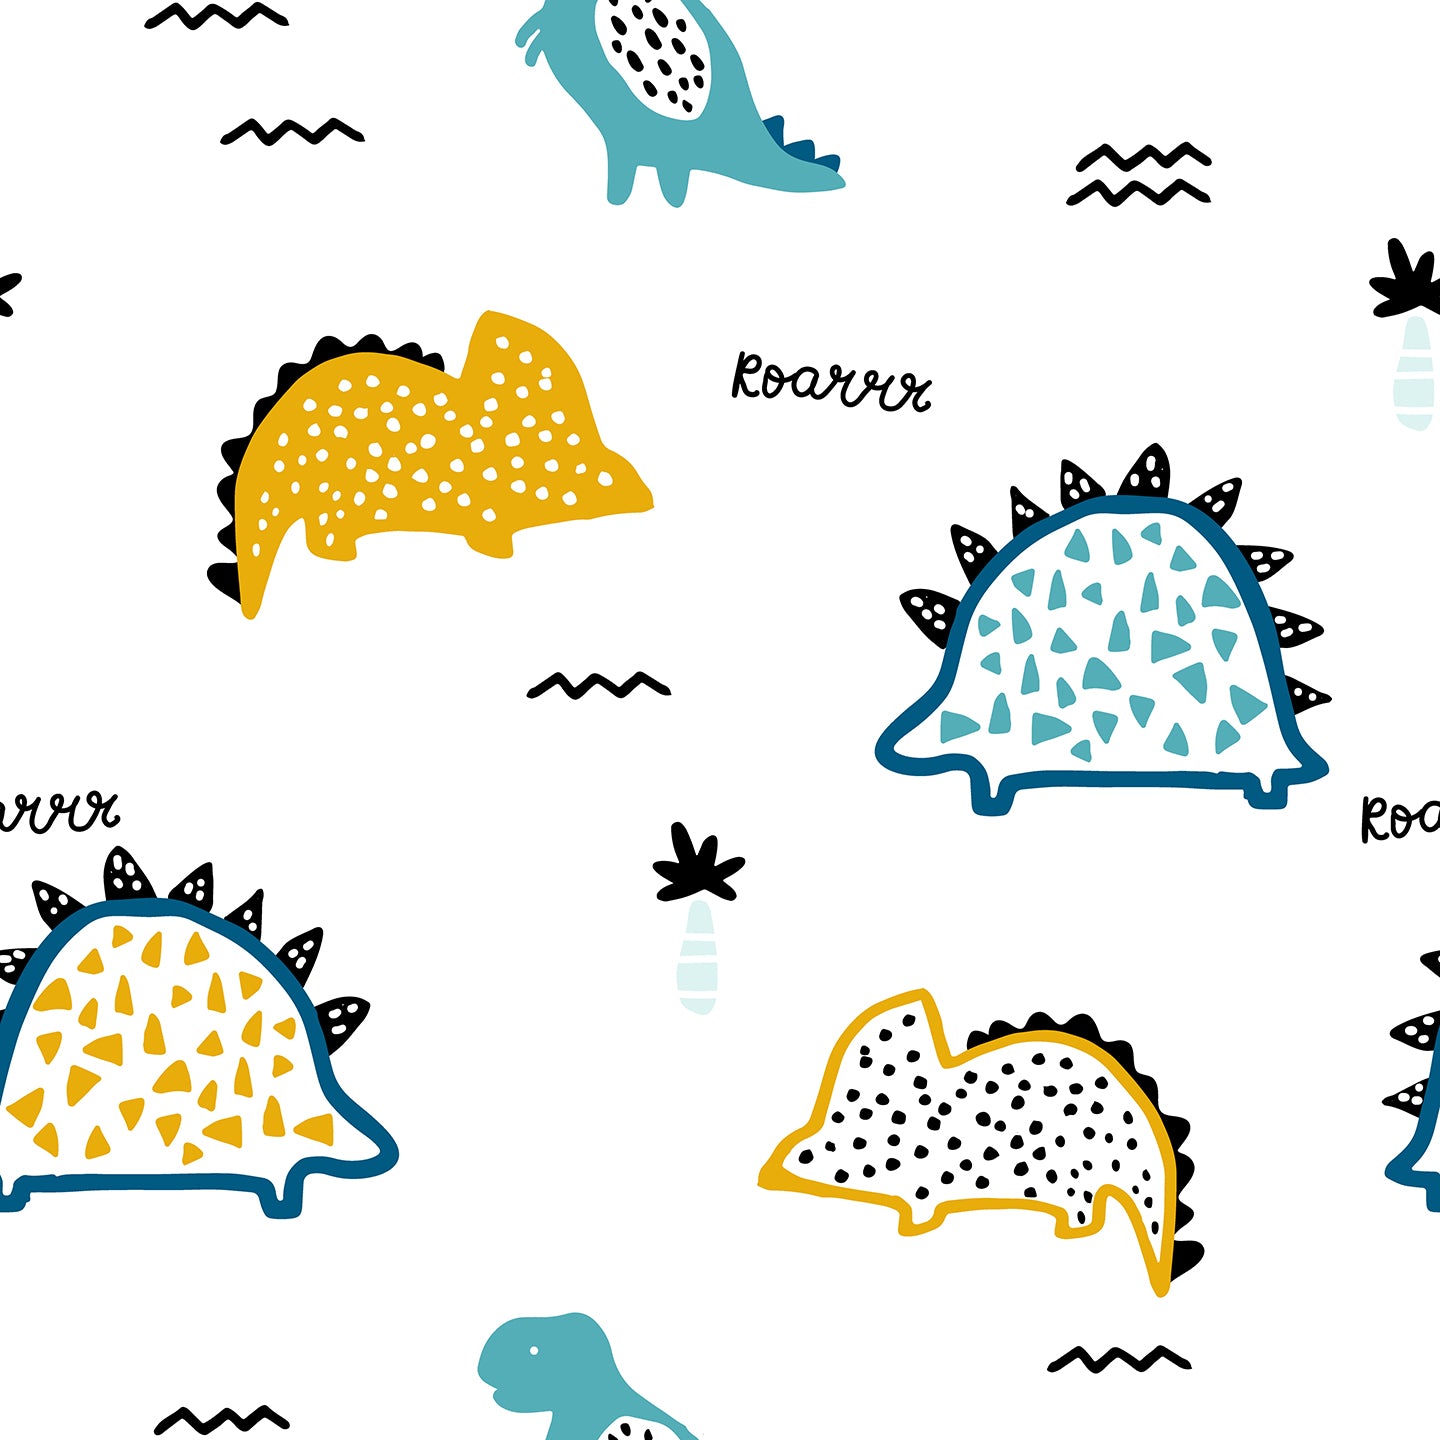 A playful and colorful wallpaper design featuring cartoon-style dinosaurs and tropical motifs in vibrant shades of yellow, blue, and black on a white background. The pattern includes friendly dinosaur illustrations, small decorative elements like palm trees and abstract shapes, and the text "Roarrr", creating a fun and engaging environment for a child's room.